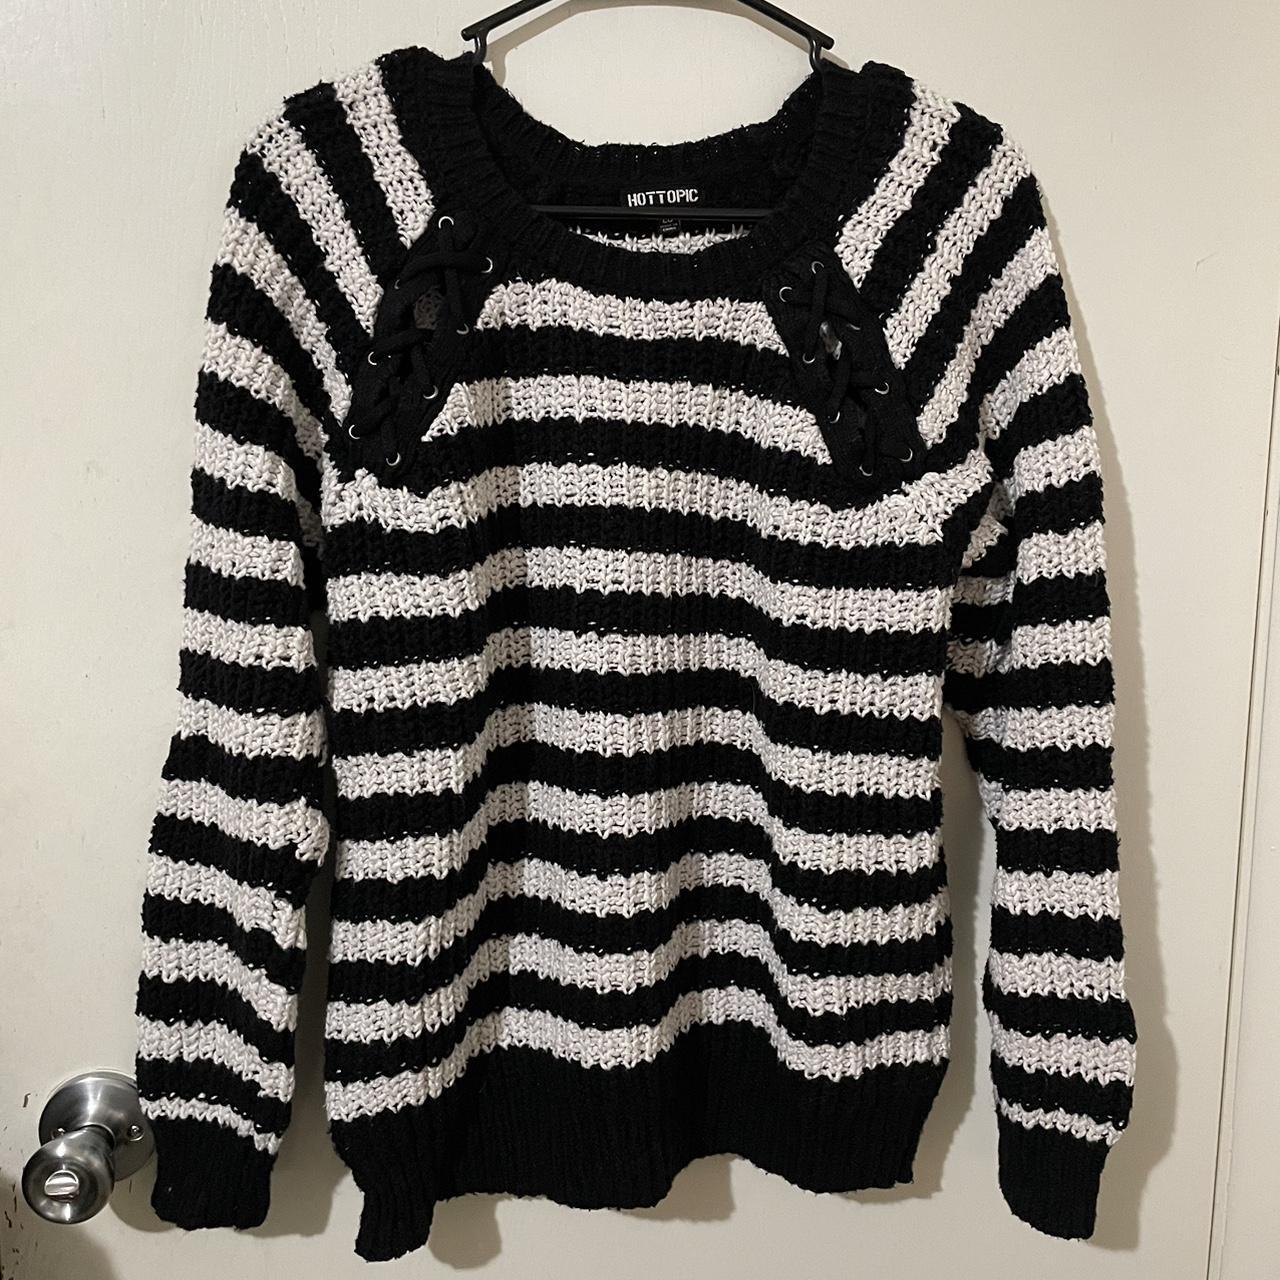 hot topic black and white striped lace up sweater in... - Depop